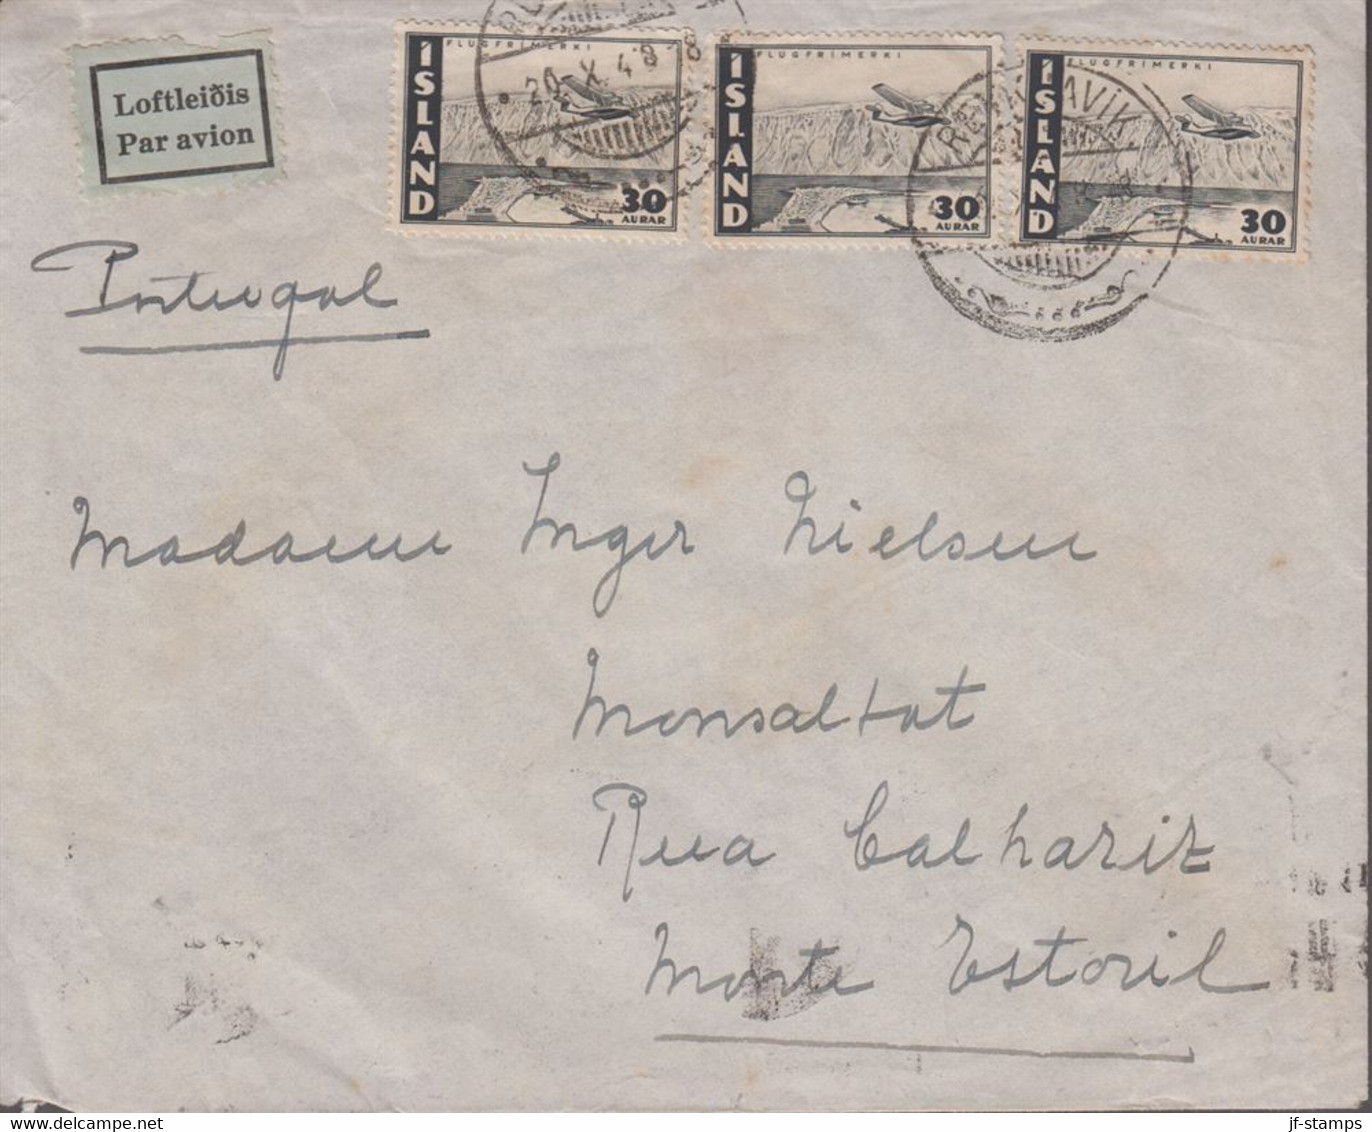 1948. ISLAND. . Air Mail. 3 Ex 30 Aur Pair On Cover From REYKJAVIK 20 X 1948 To Portu... (Michel 242) - JF419126 - Lettres & Documents